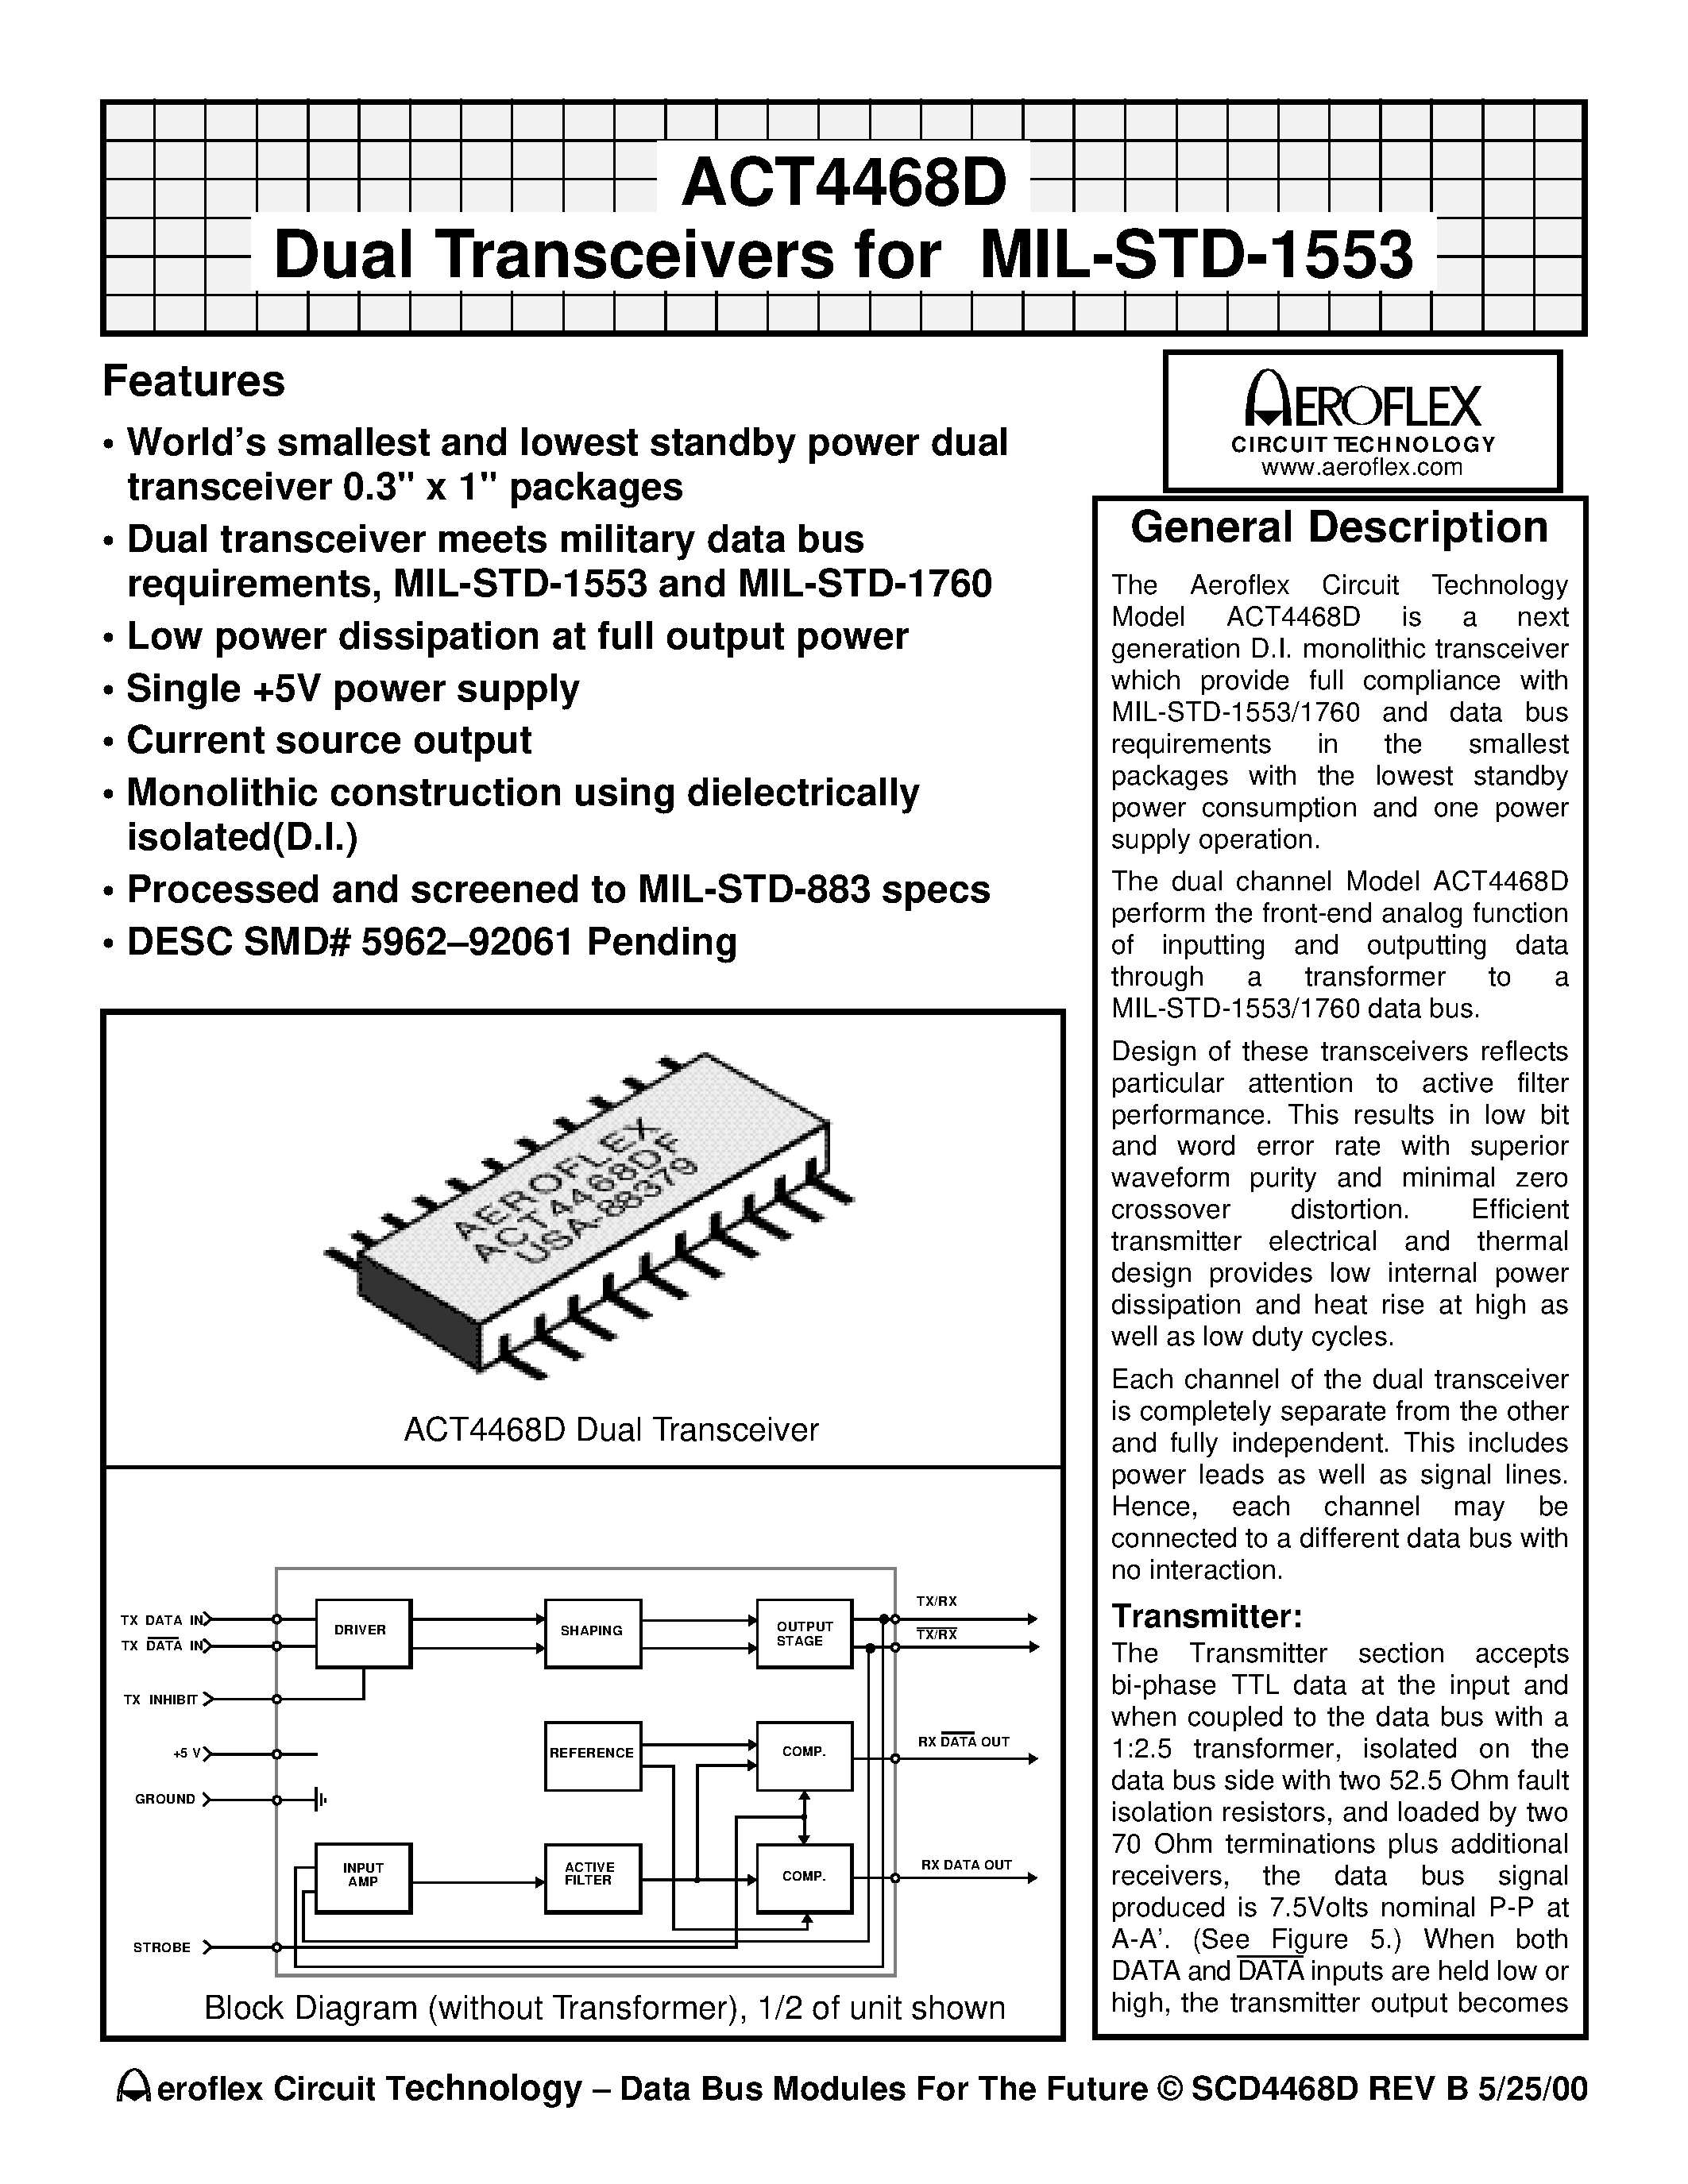 Даташит ACT4468DF - ACT4468D Dual Transceivers for MIL-STD-1553 страница 1